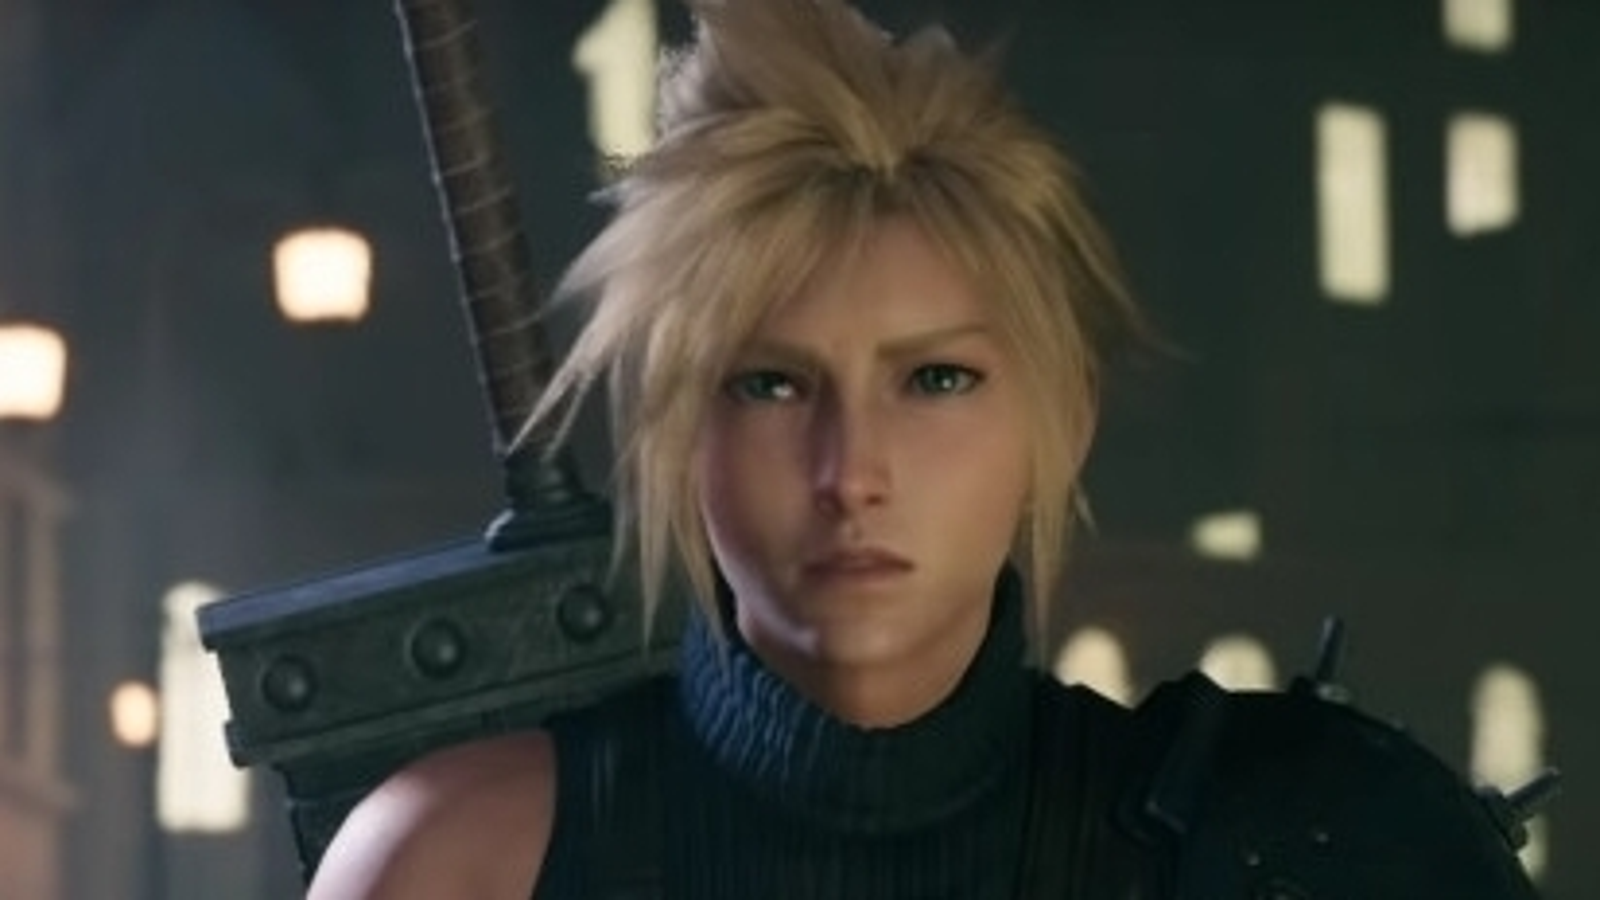 Final Fantasy VII' Remake Coming March 2020